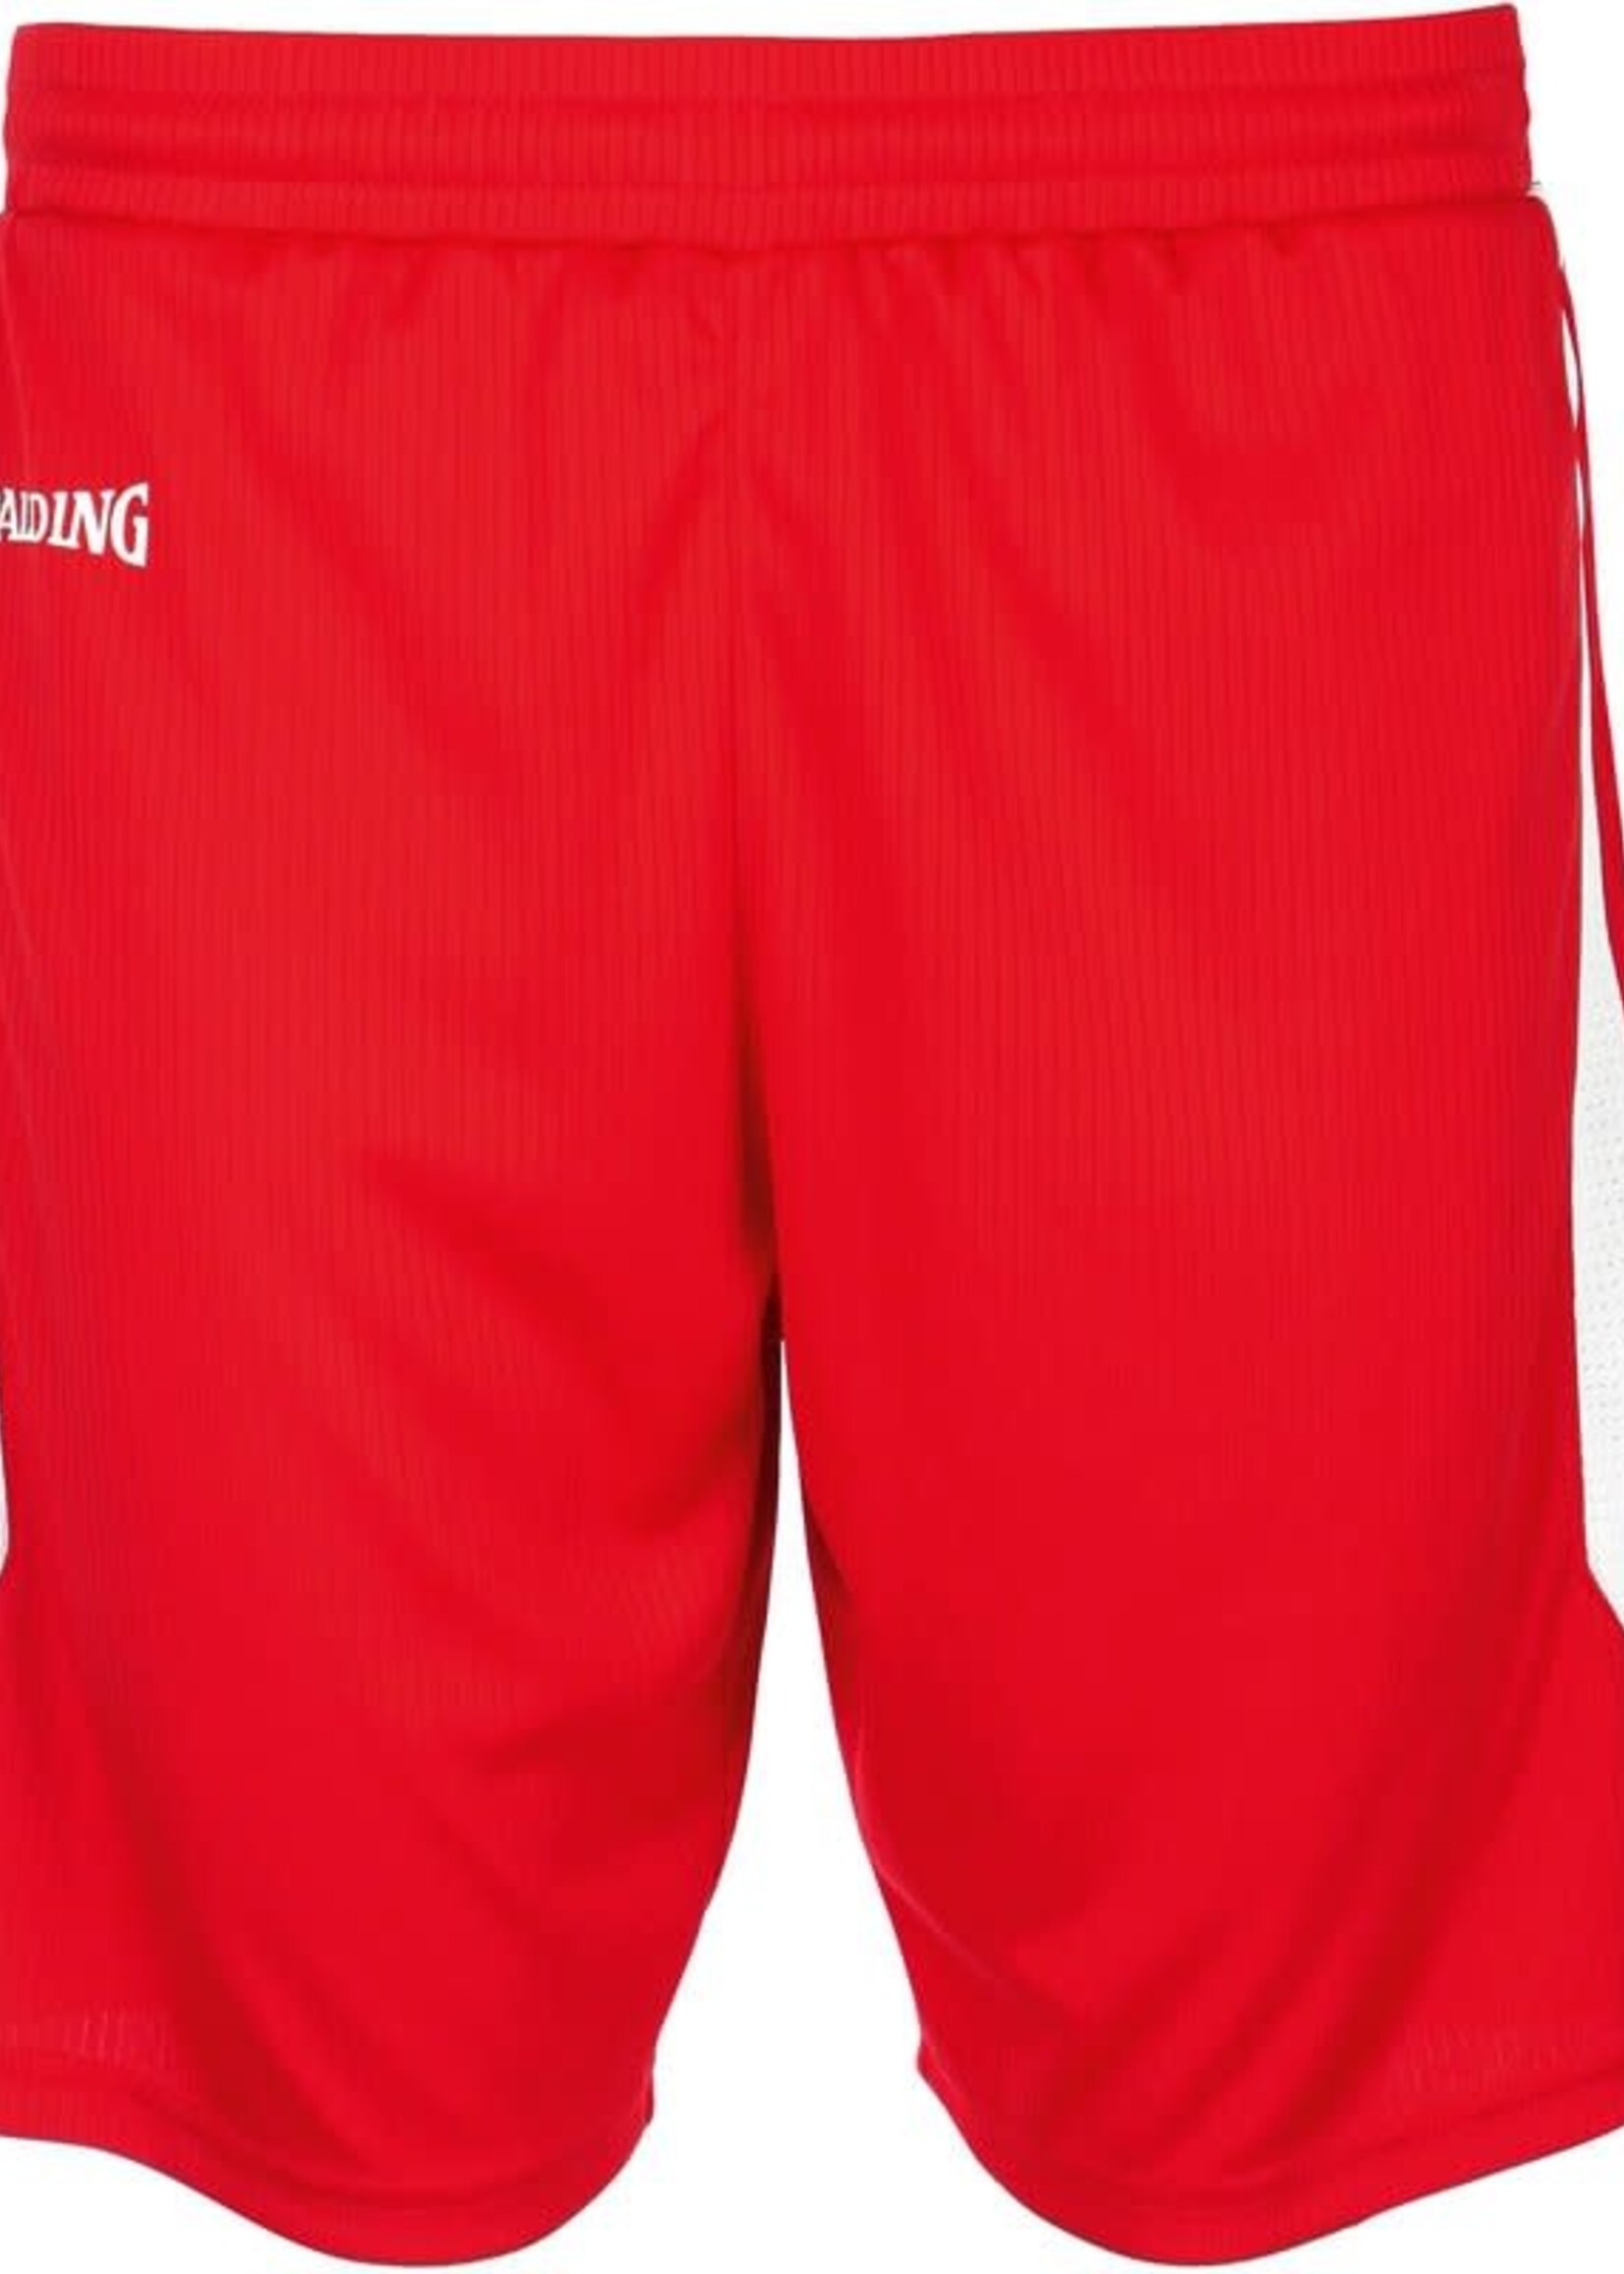 Spalding 4Her III Shorts Red White